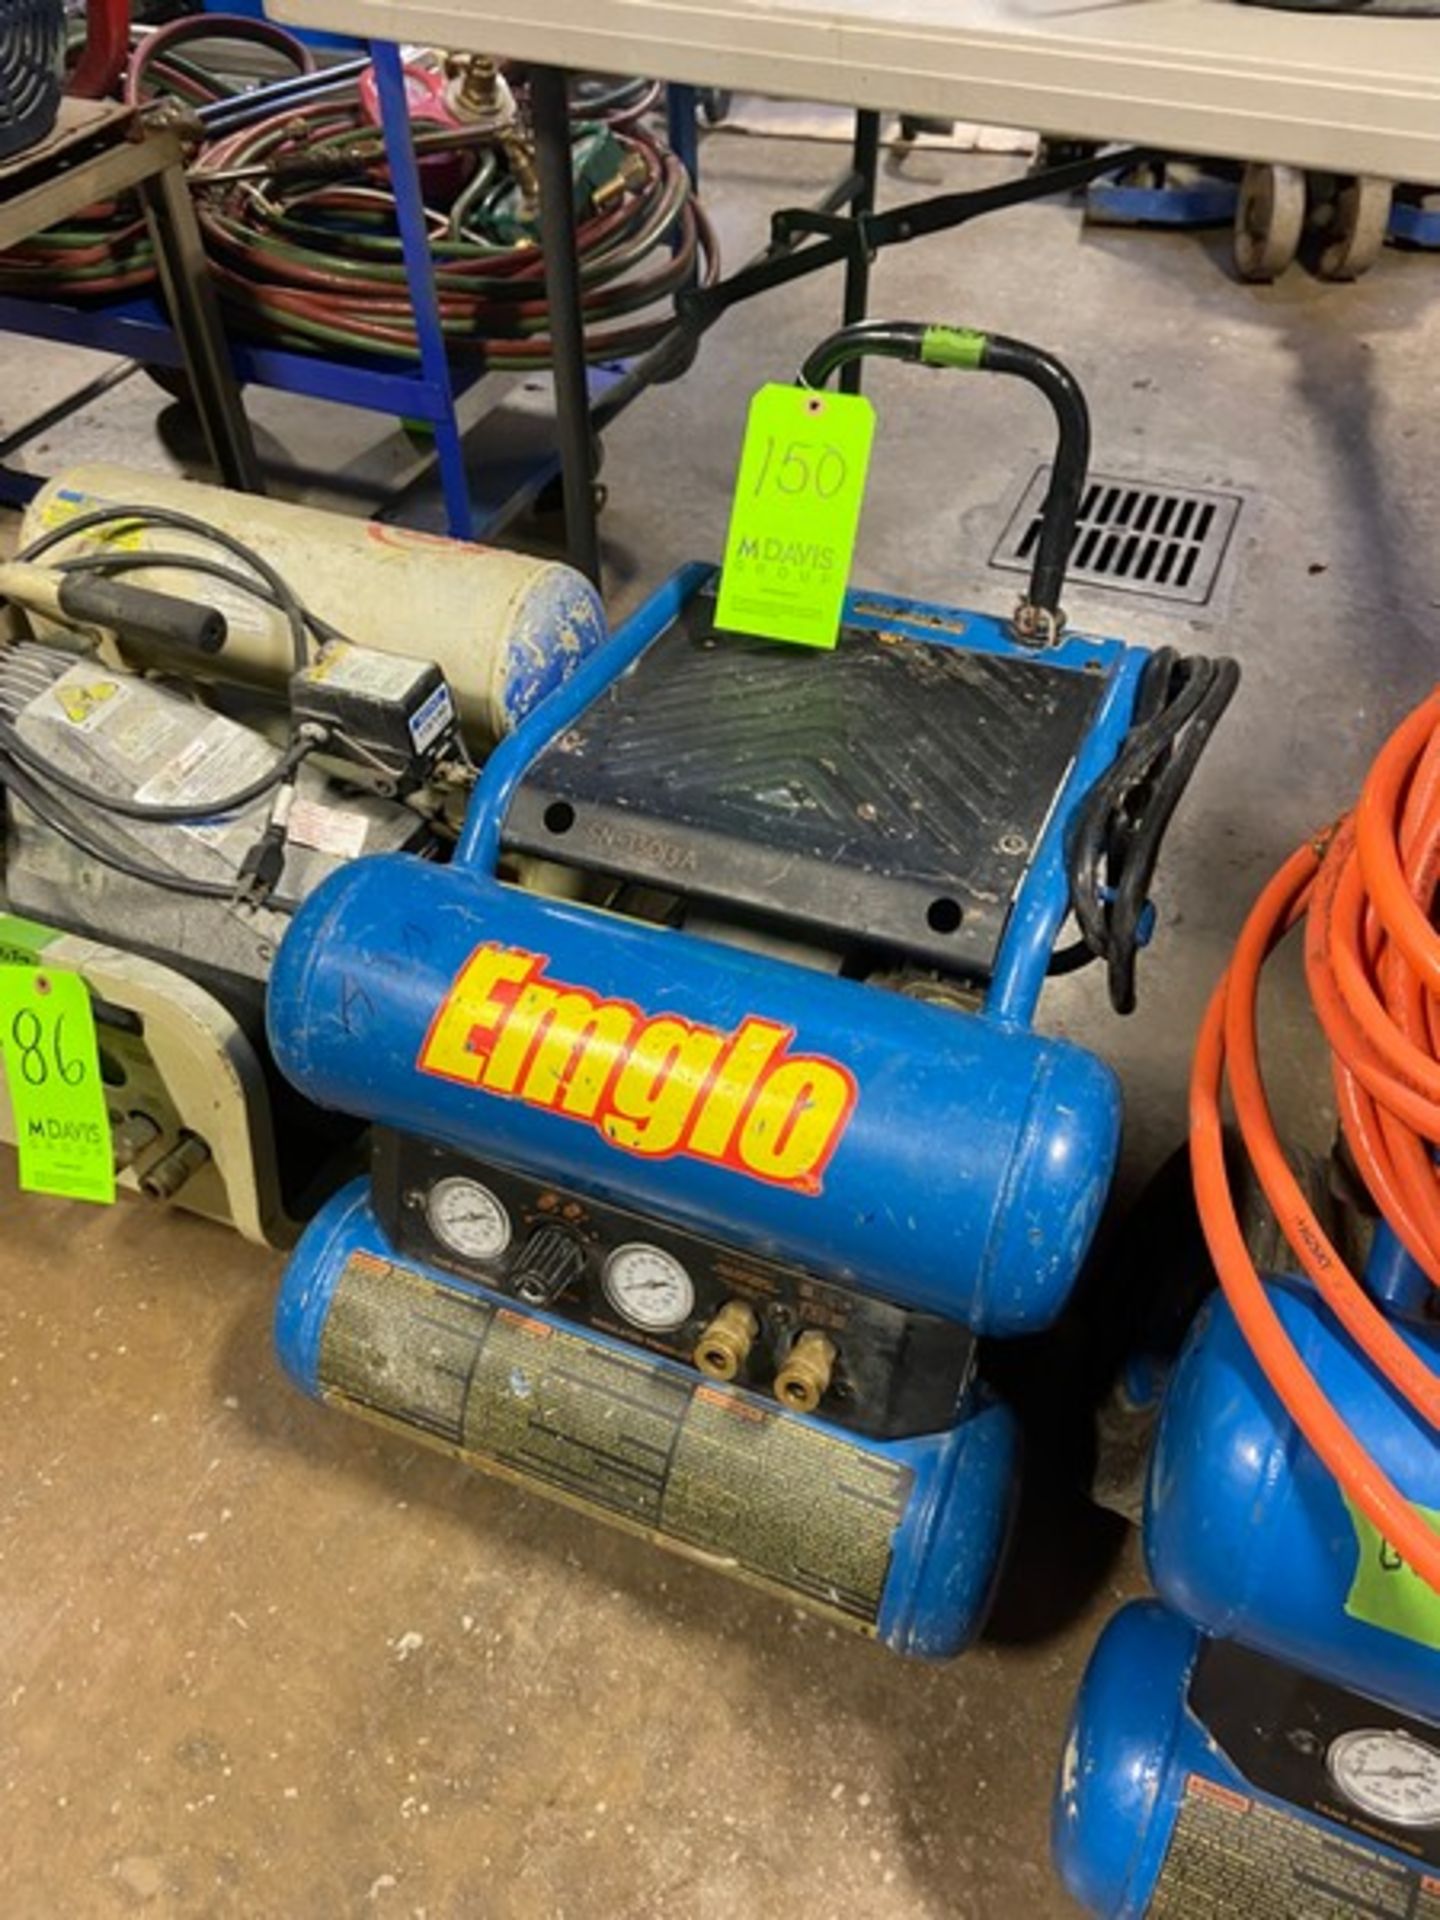 Emglo Portable Air Compressor, with S/S Diaphragm Pump, with Orange Hose, Mounted on Portable Wheels